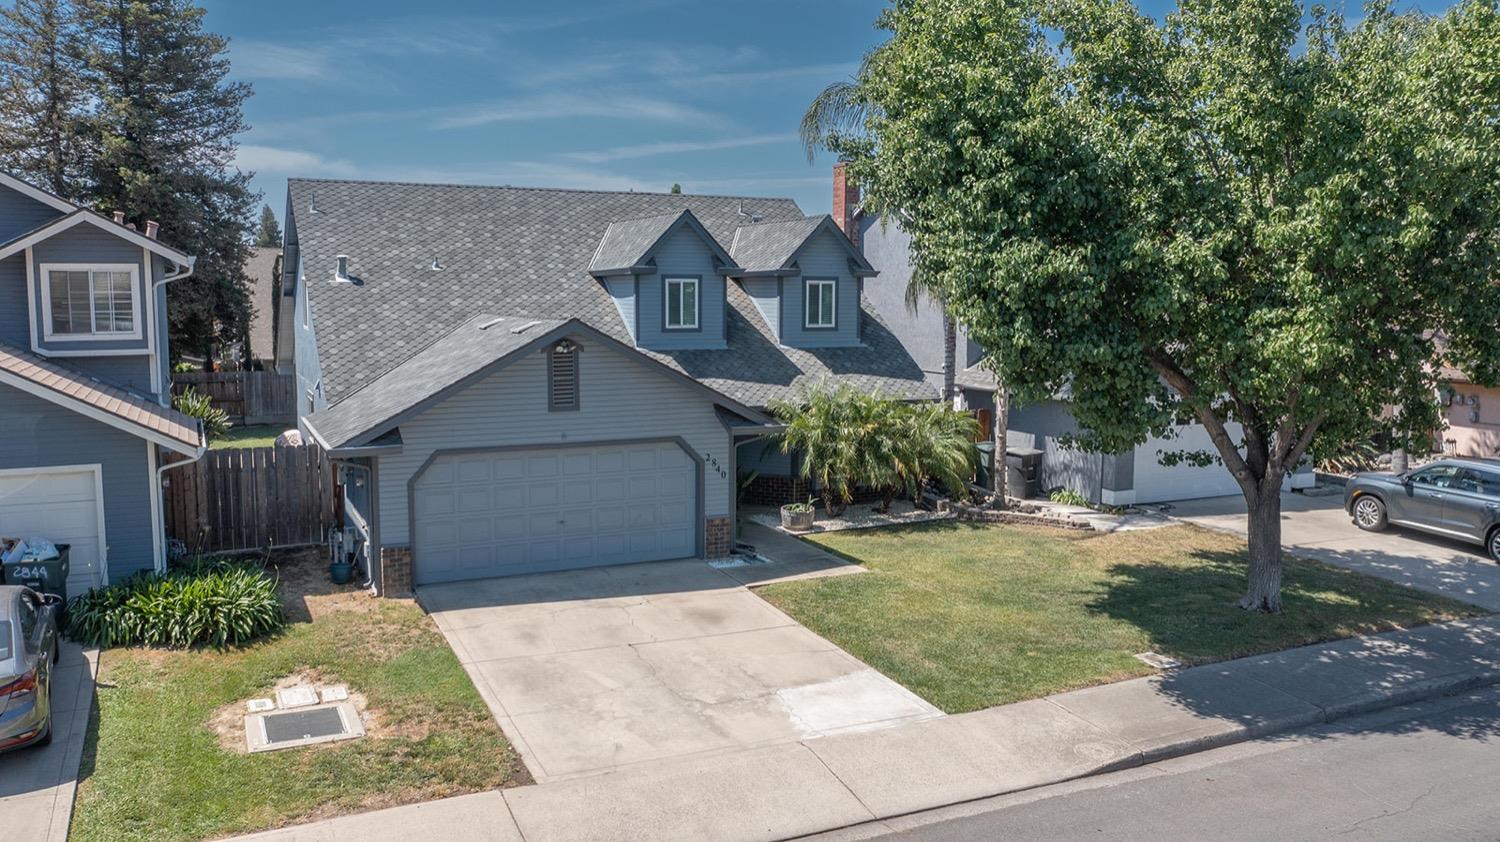 2840-merle-ave-modesto-ca-95355-mls-222067114-coldwell-banker